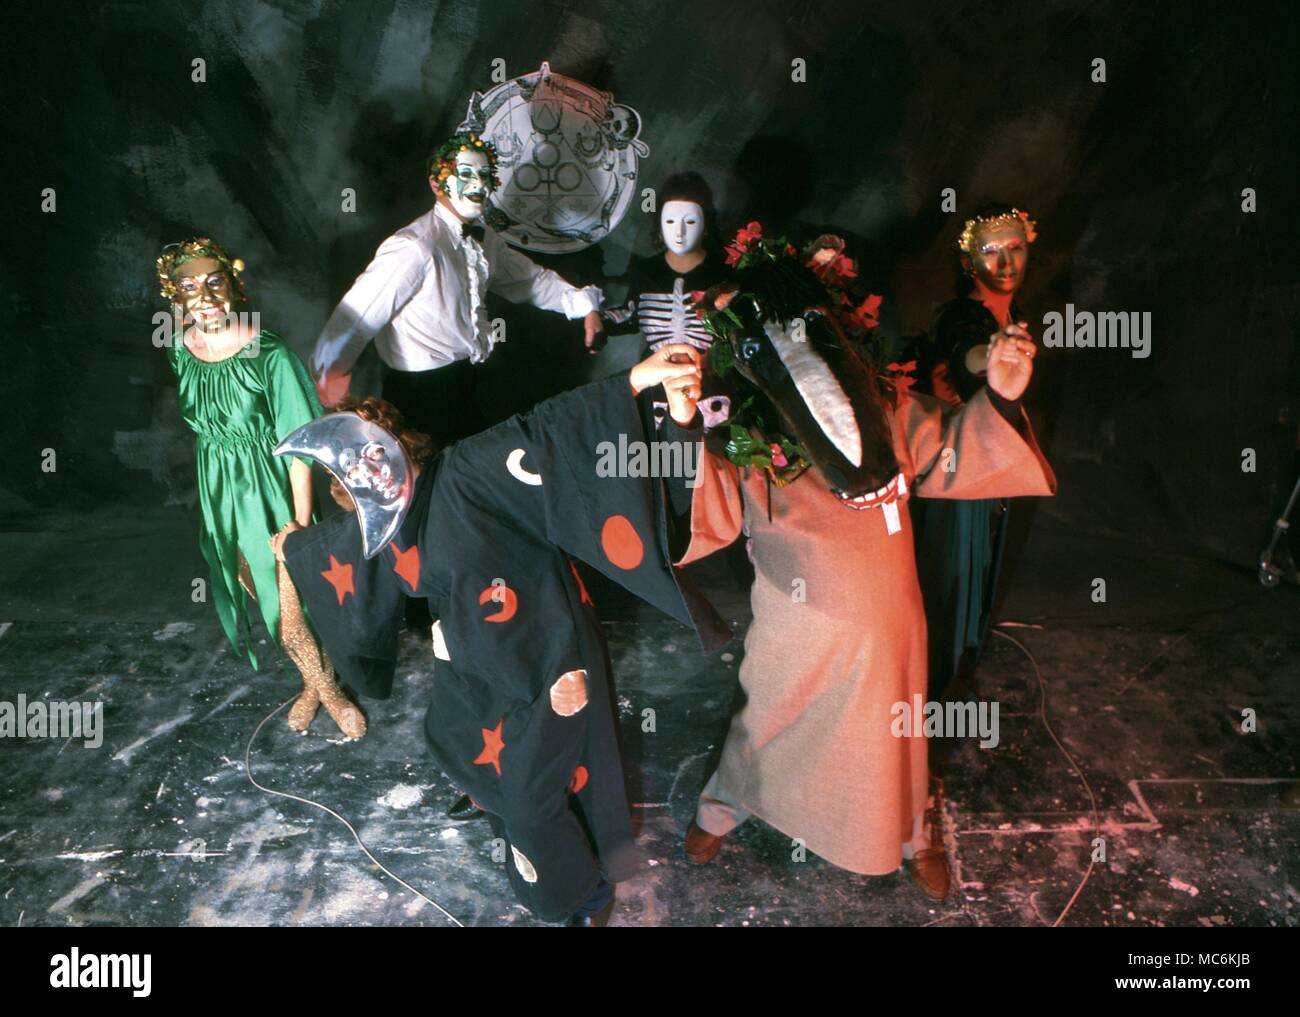 A group of people in a witchcraft burlesque, dressed in outlandish costumes and masks, dancing within a magical circle. Stock Photo